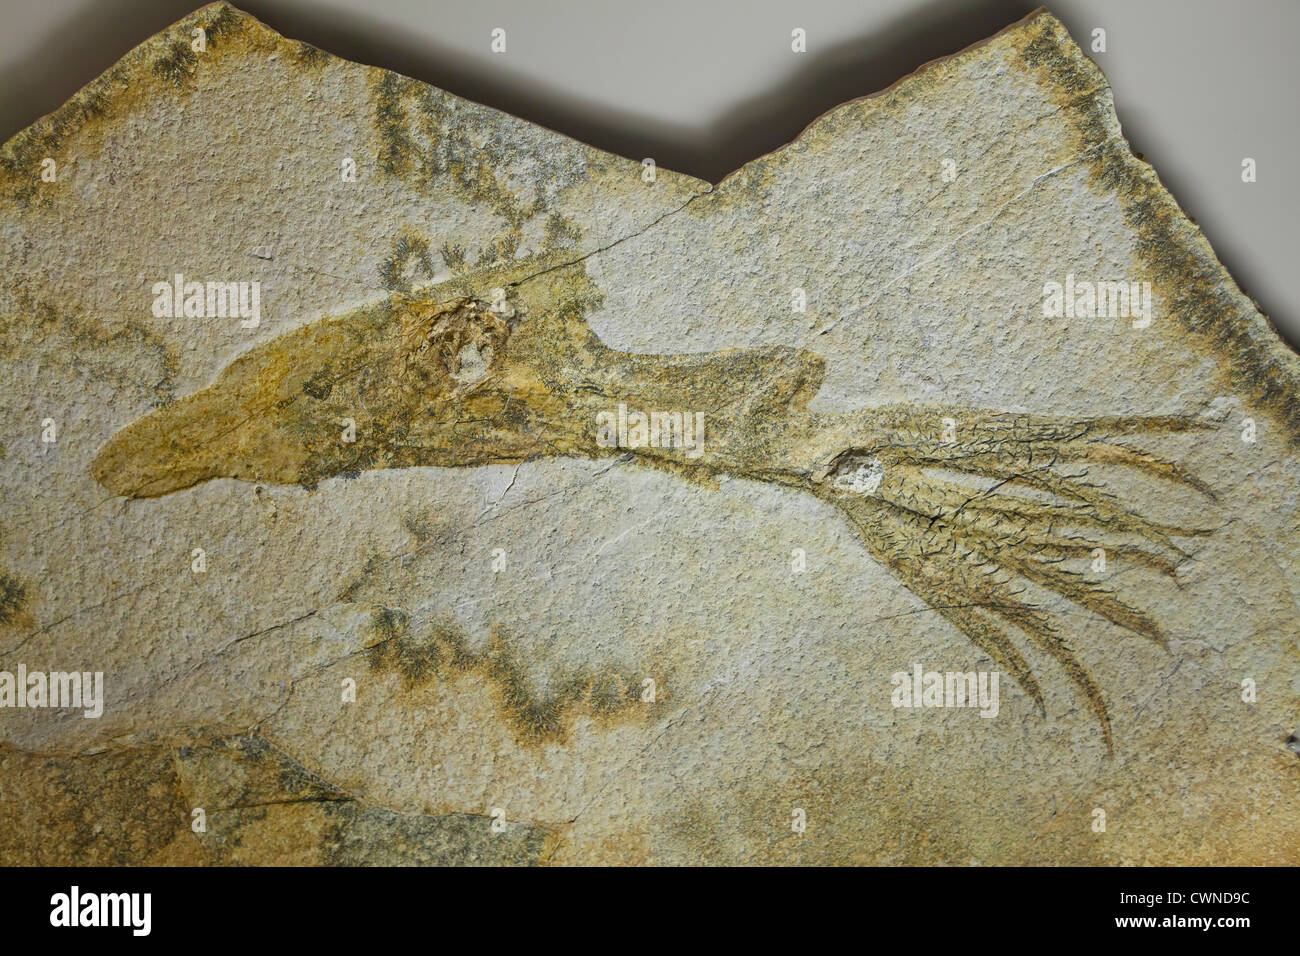 Squid fossil from the Late Jurassic period Stock Photo